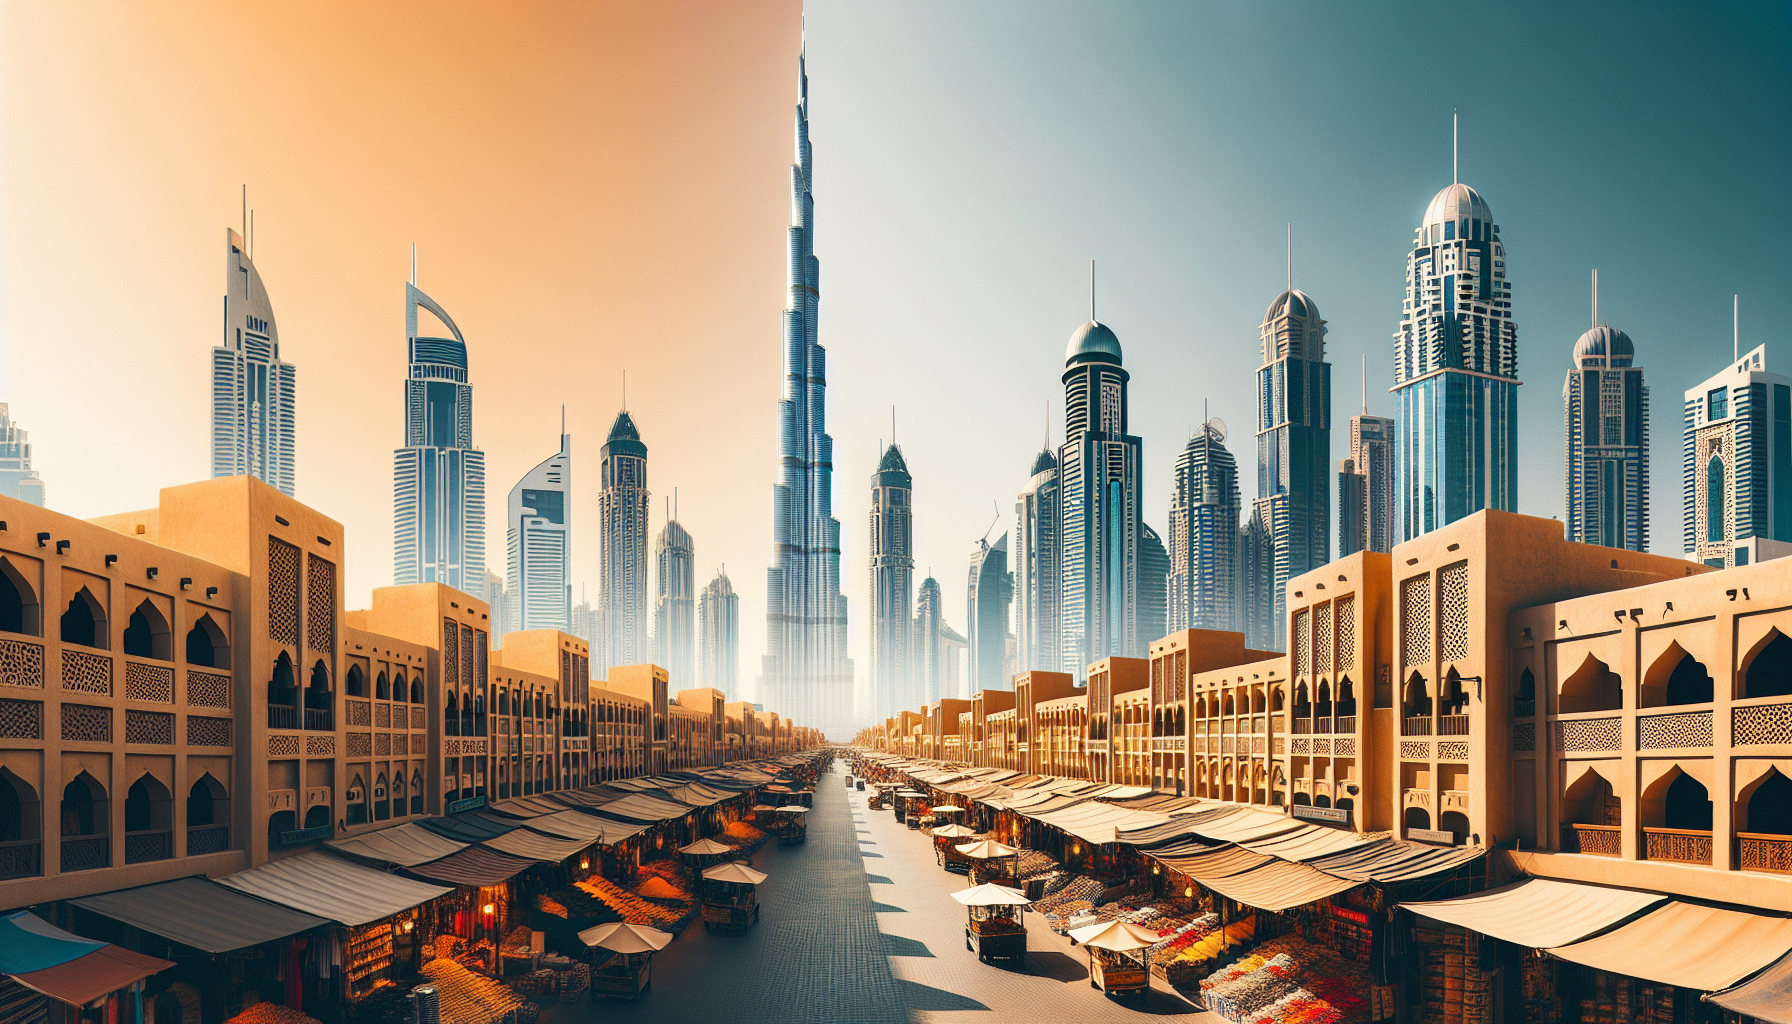 Wrap up Your Dubai Adventure with Fond Memories and a Safe Journey Home